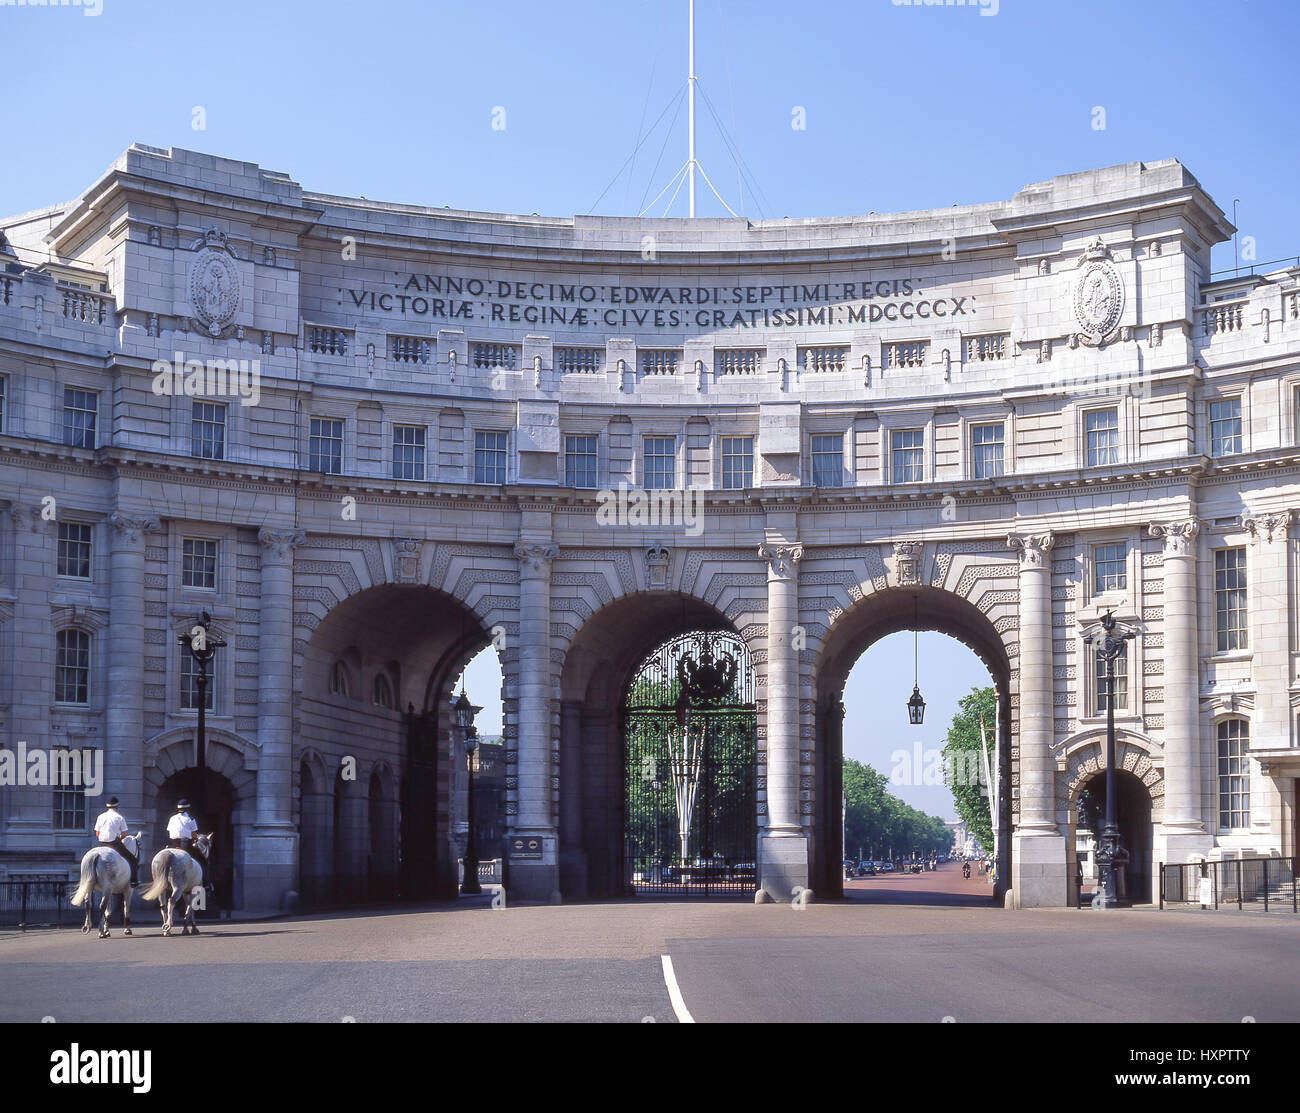 L'Admiralty Arch de Trafalgar Square, City of westminster, Greater London, Angleterre, Royaume-Uni Banque D'Images